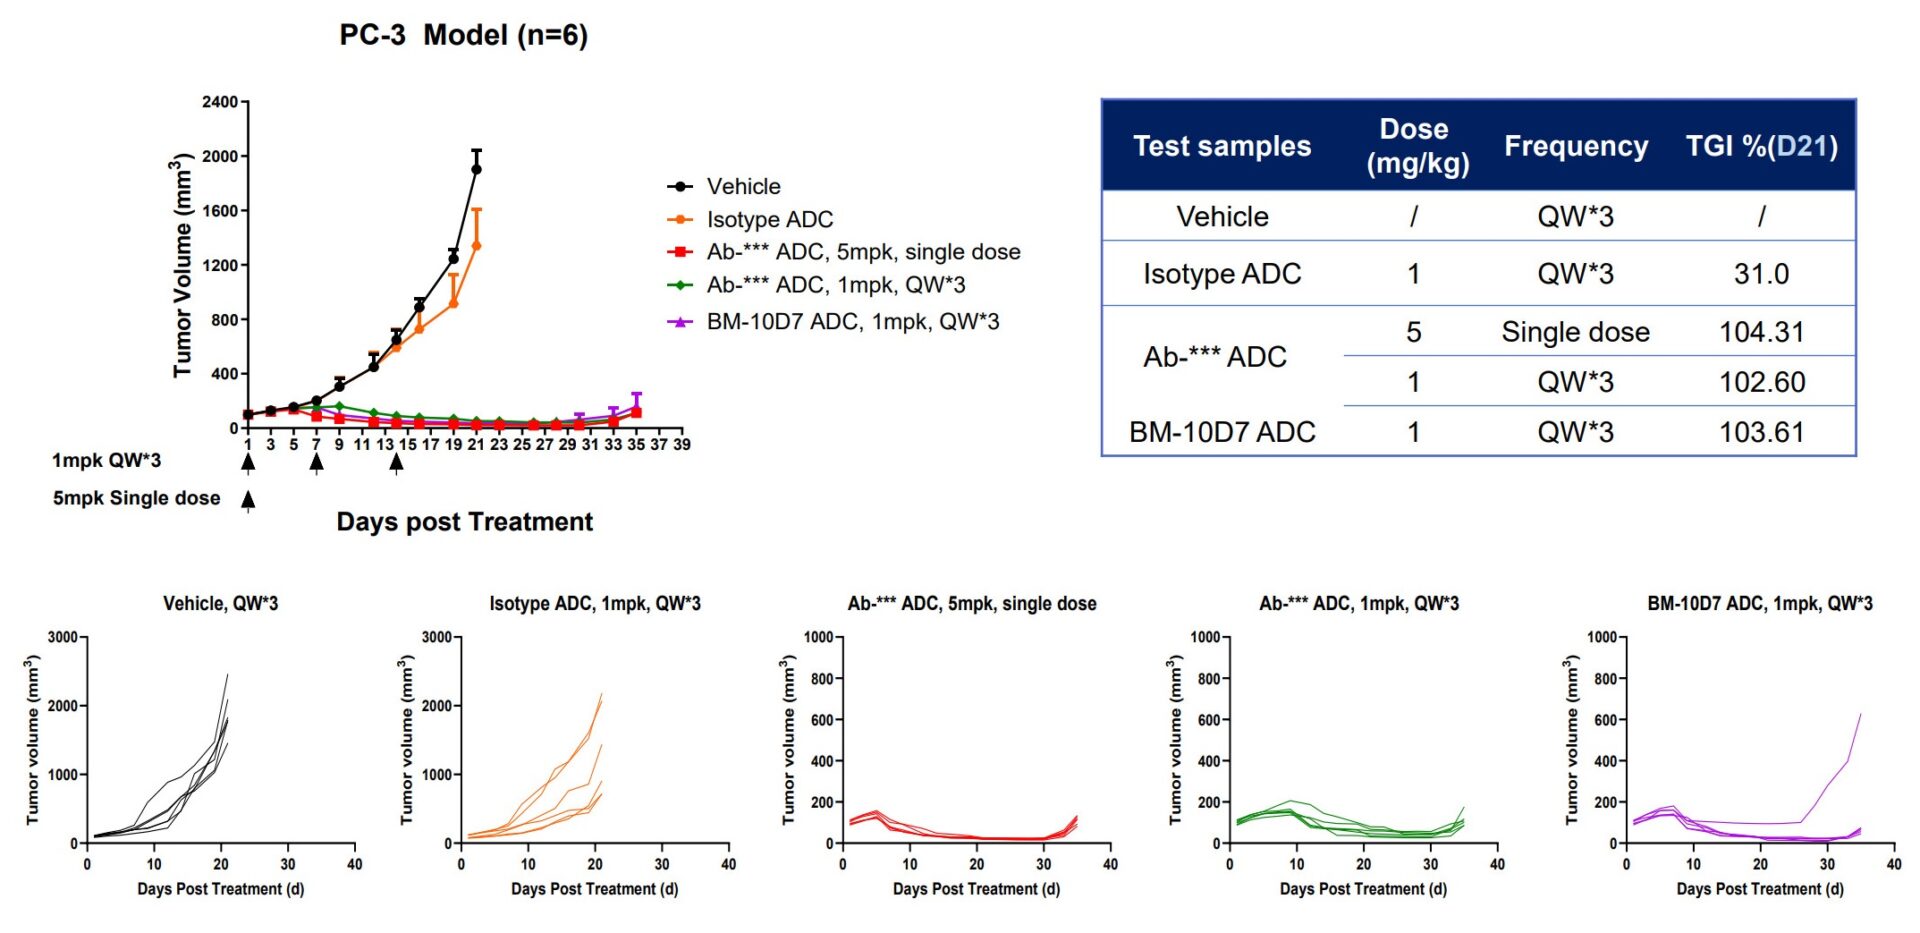 【Product for Licensing】ANTI-CDCP1 mAb and ADC